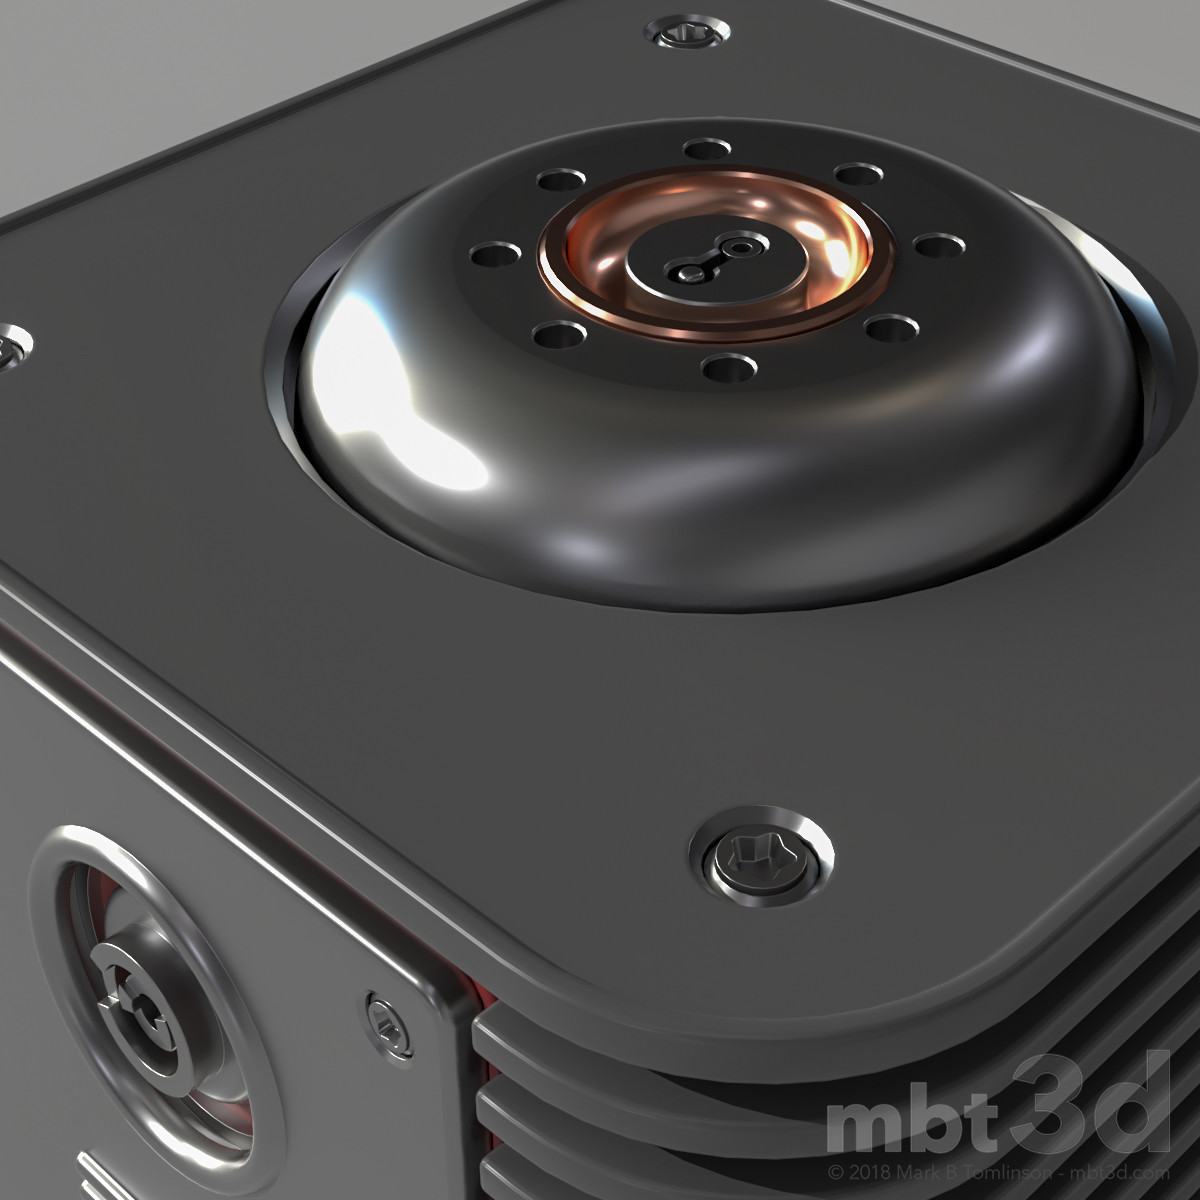 Box X: Top Close up.
Hard surface Boolean MODO exercise 